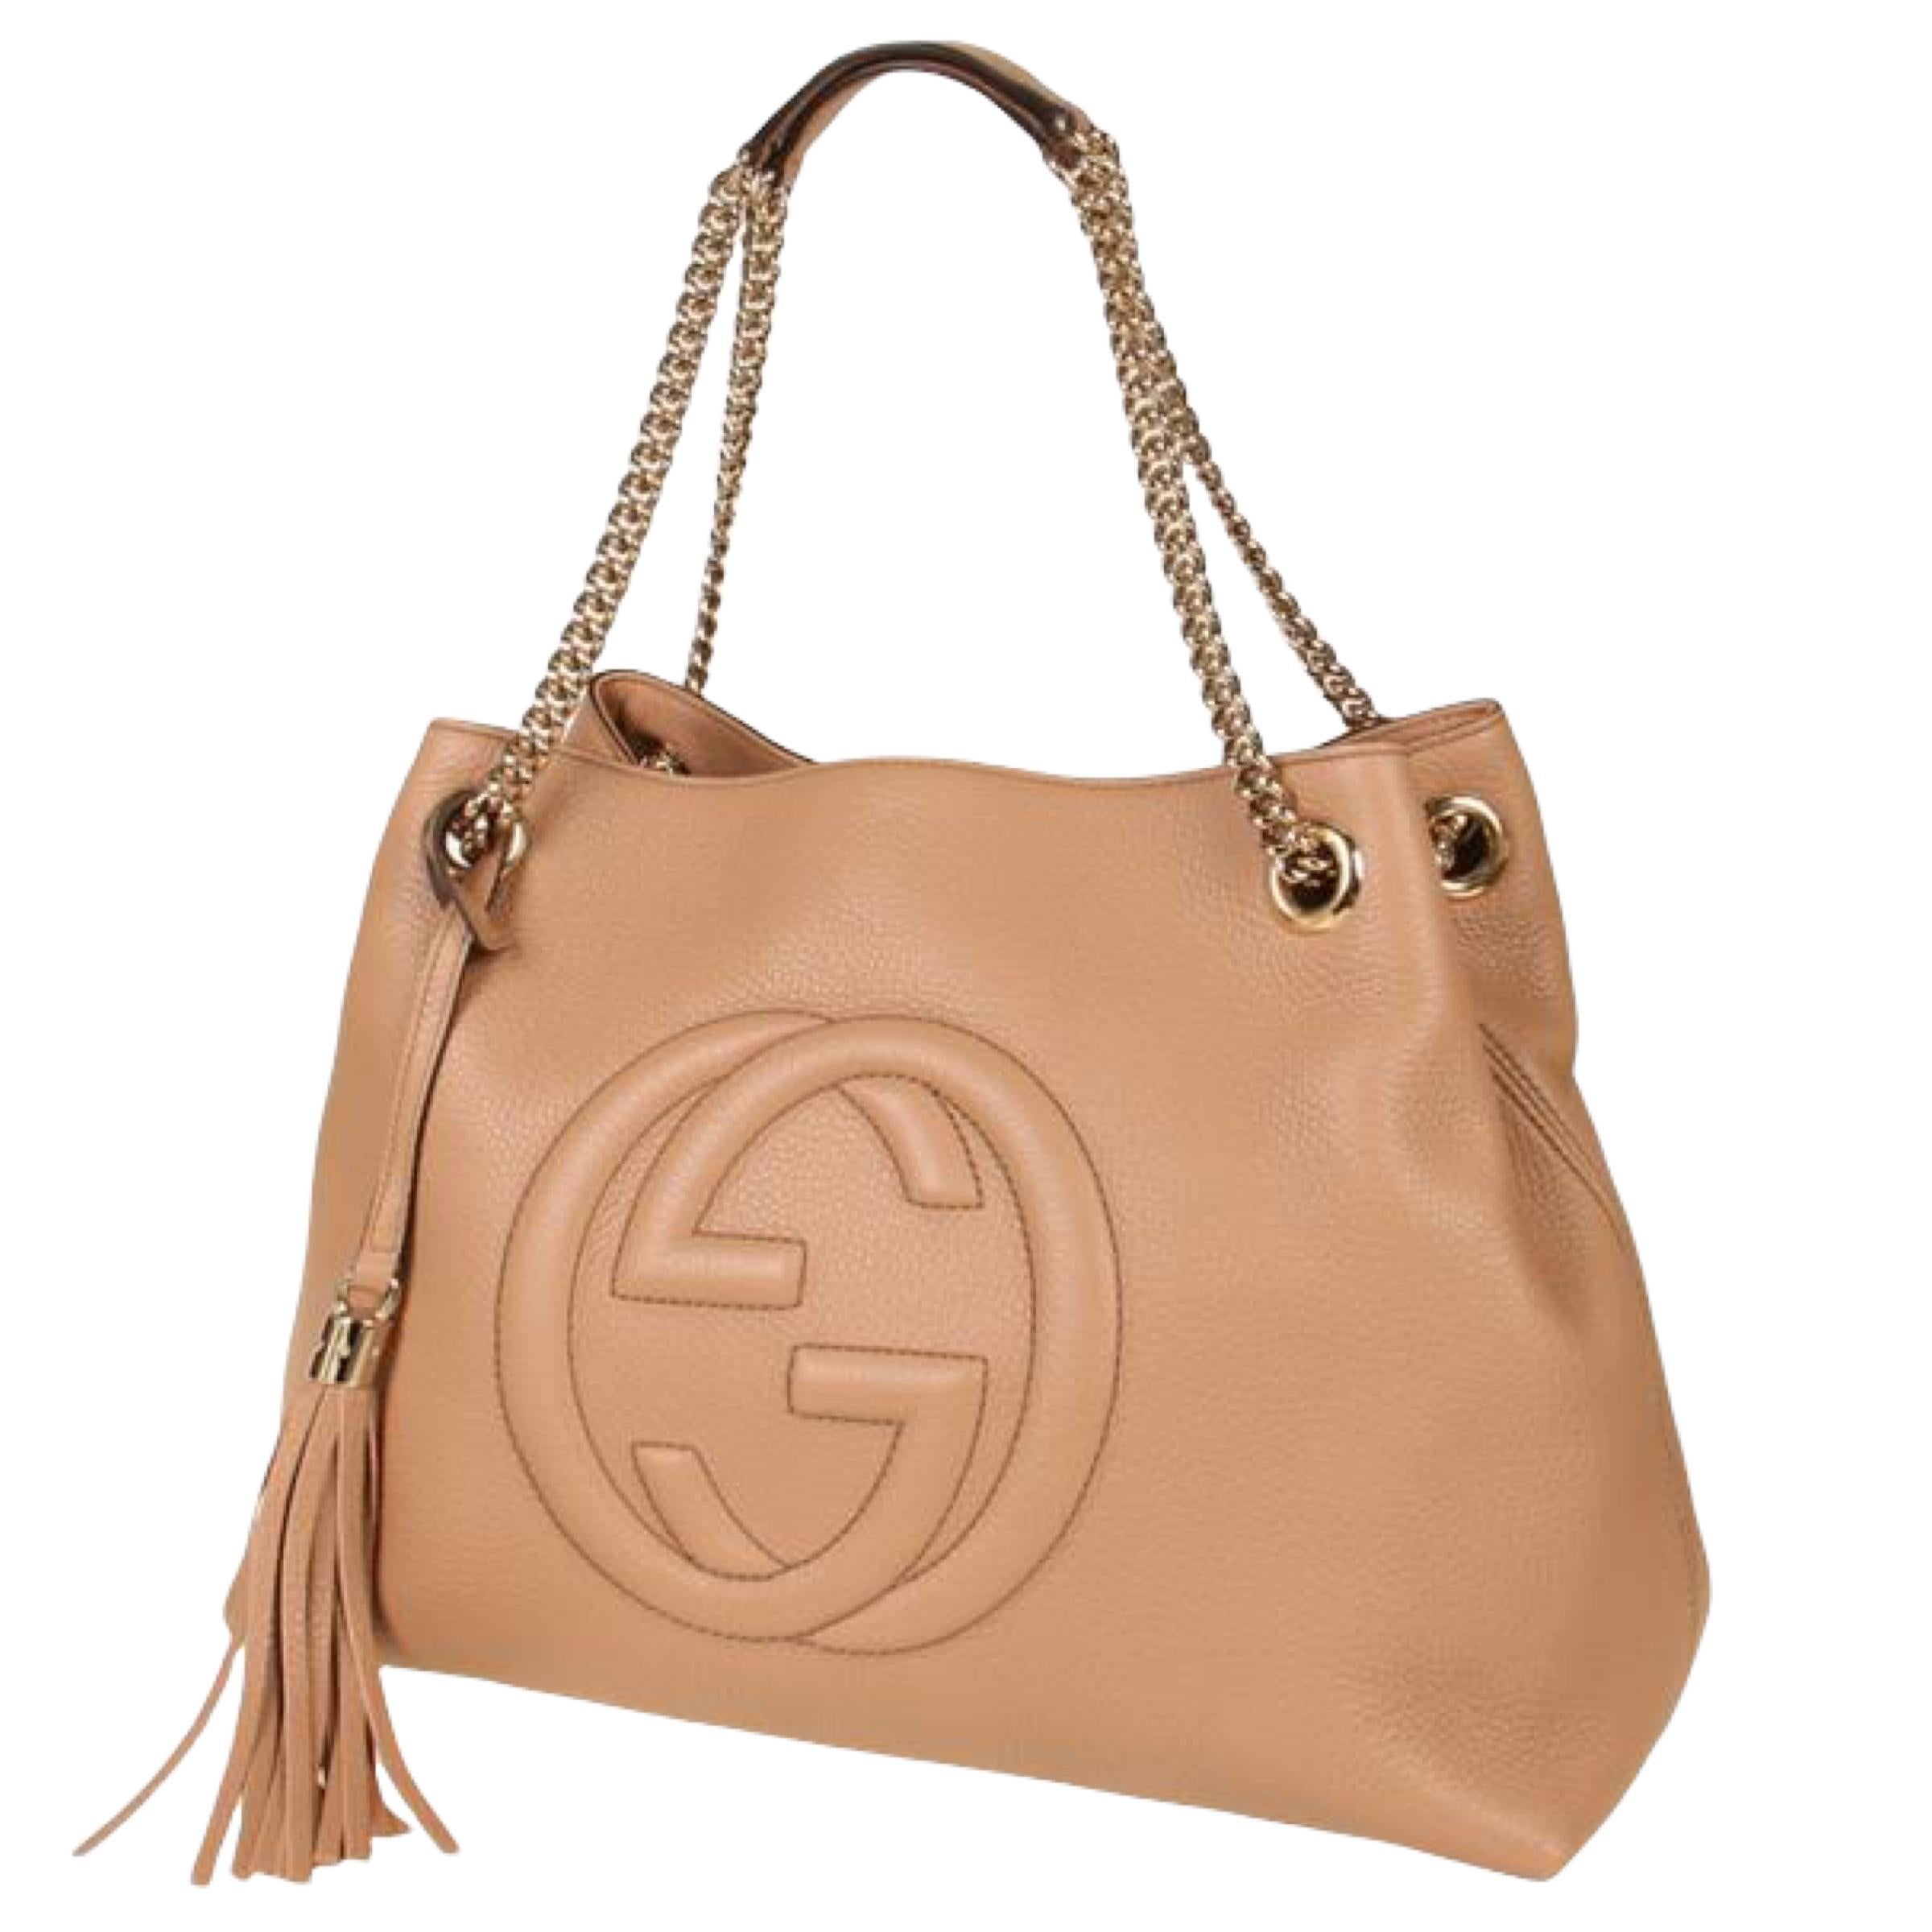 NEW Gucci Beige Pebbled Leather Medium Soho Chain Tote Shoulder Bag For Sale 1